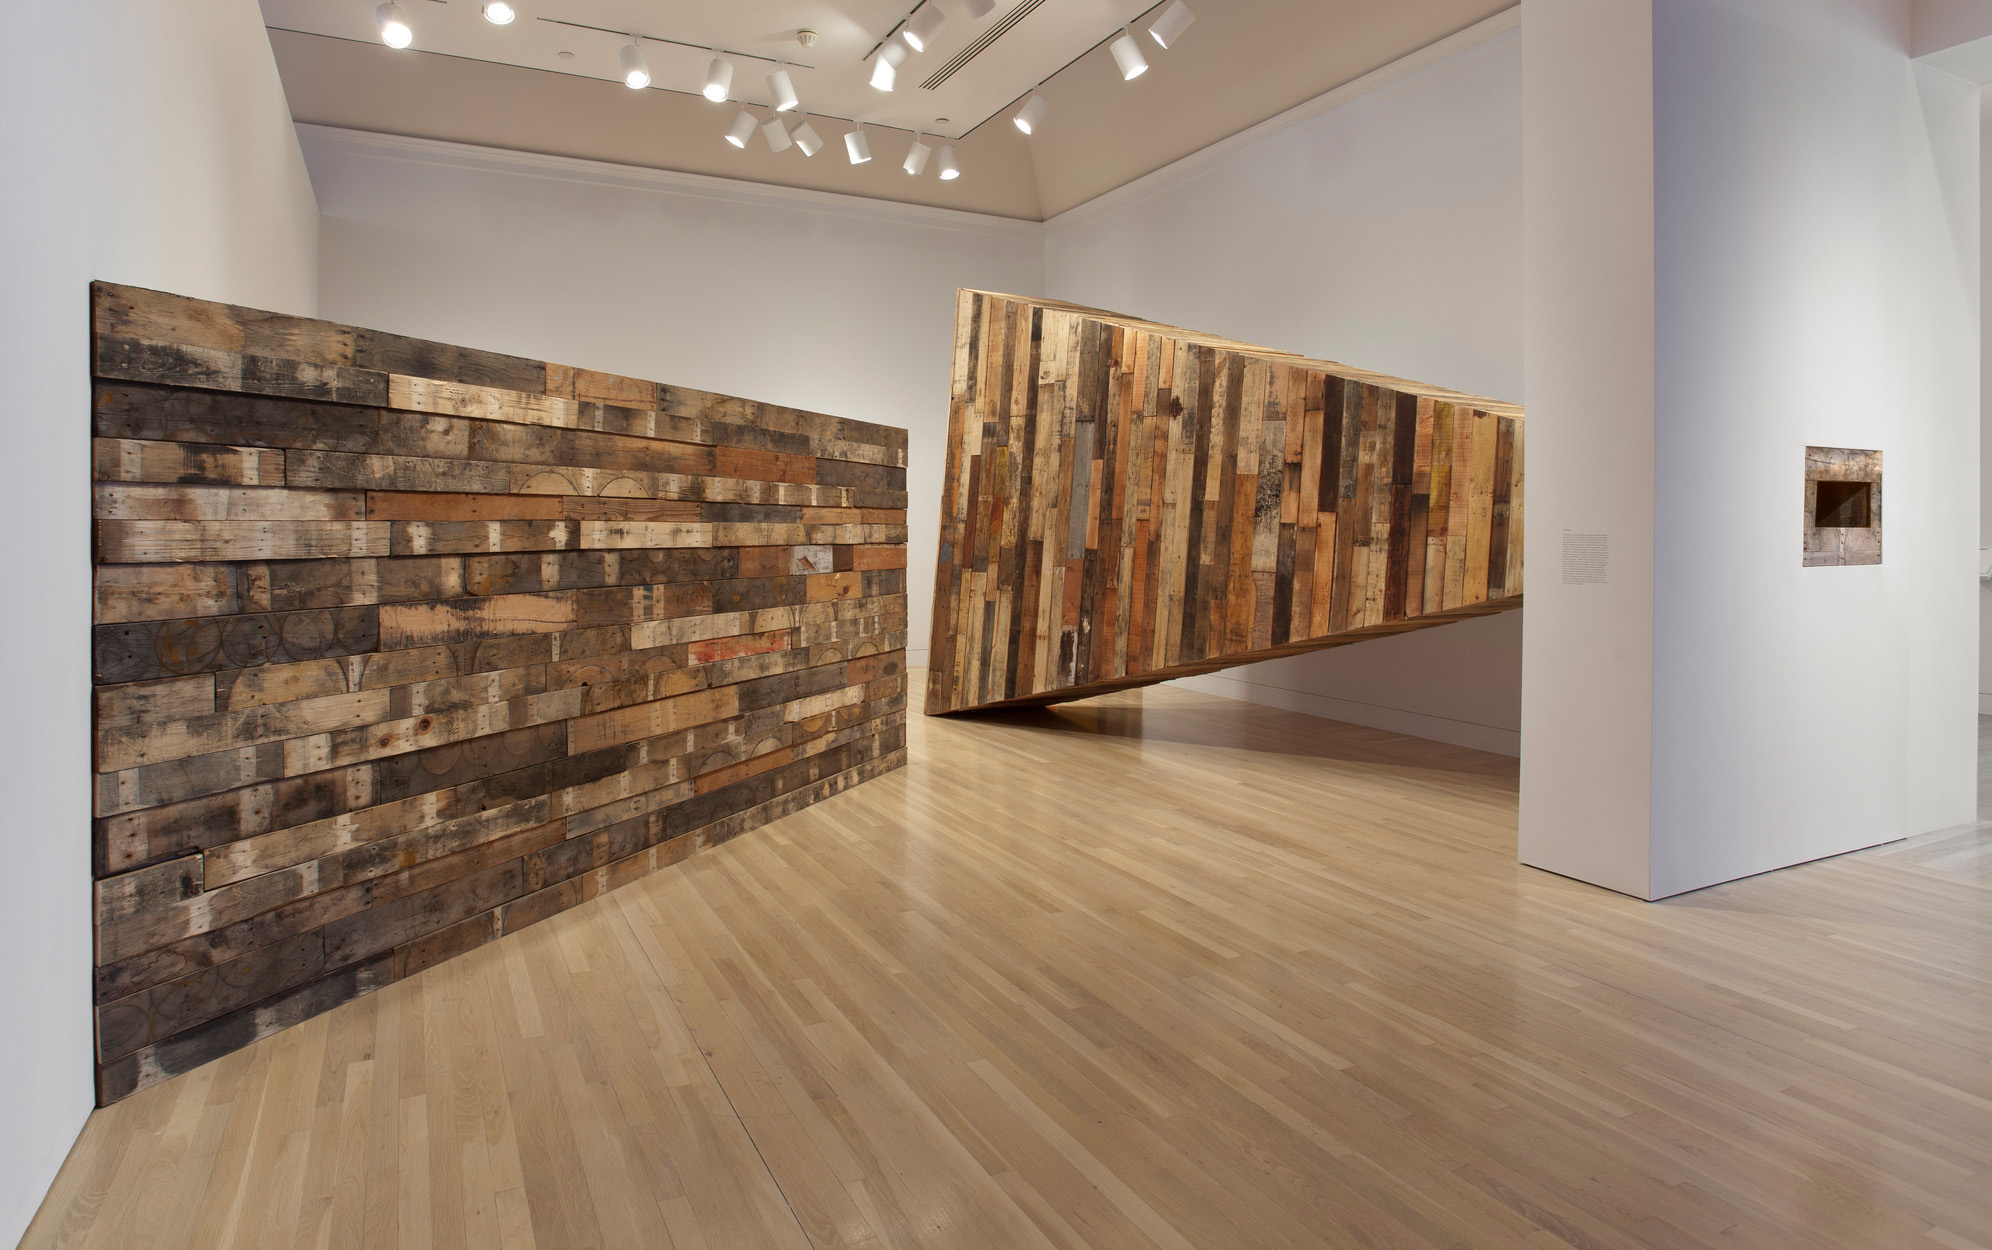 Liz Glynn, <em>Made in L.A. 2012</em>, 2012. Installation view at the Hammer Museum, Los Angeles. Photo: Brian Forrest. Courtesy of the Hammer Museum.